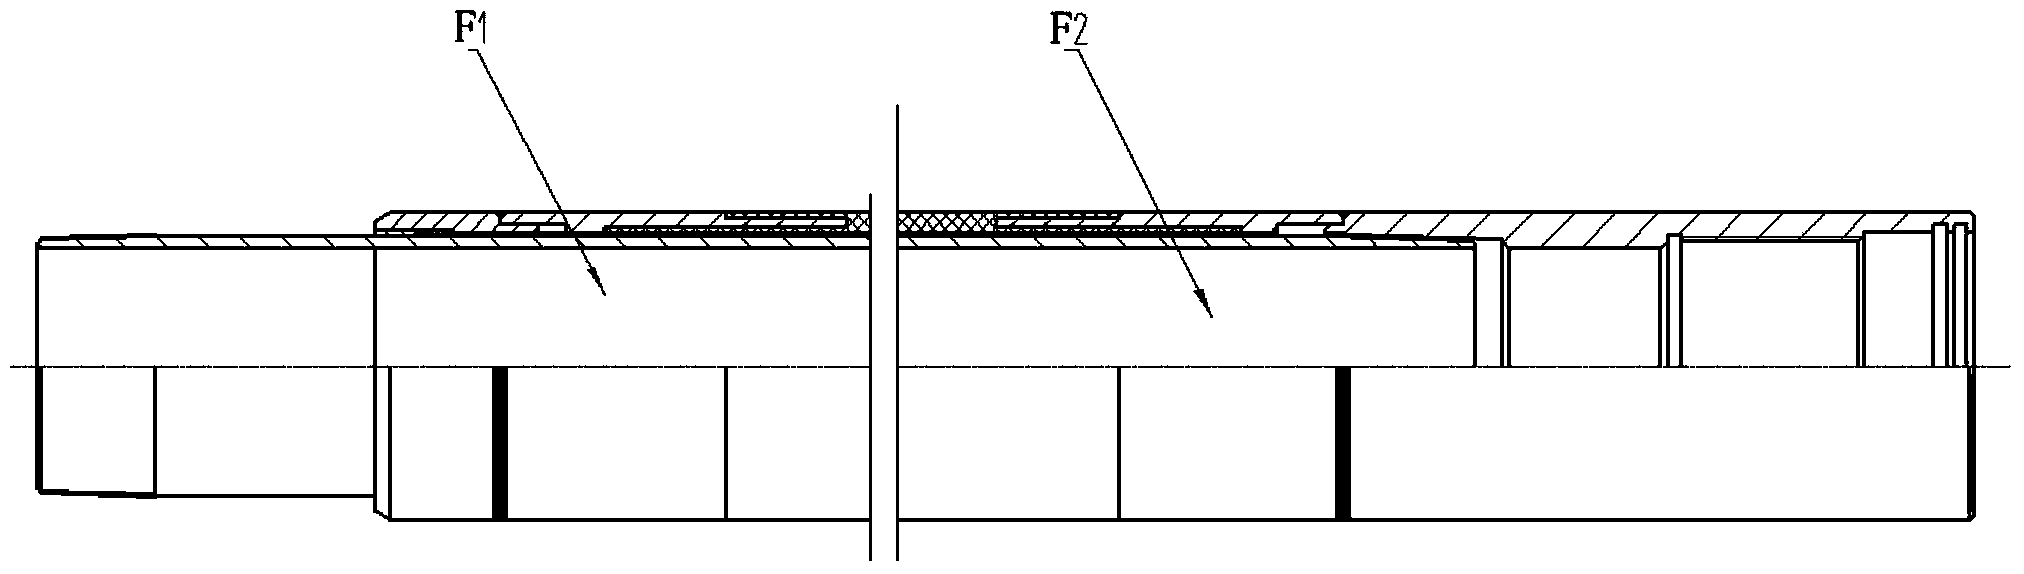 Two-stage sealing bumping-pressure salvageable well completion device for horizontal well